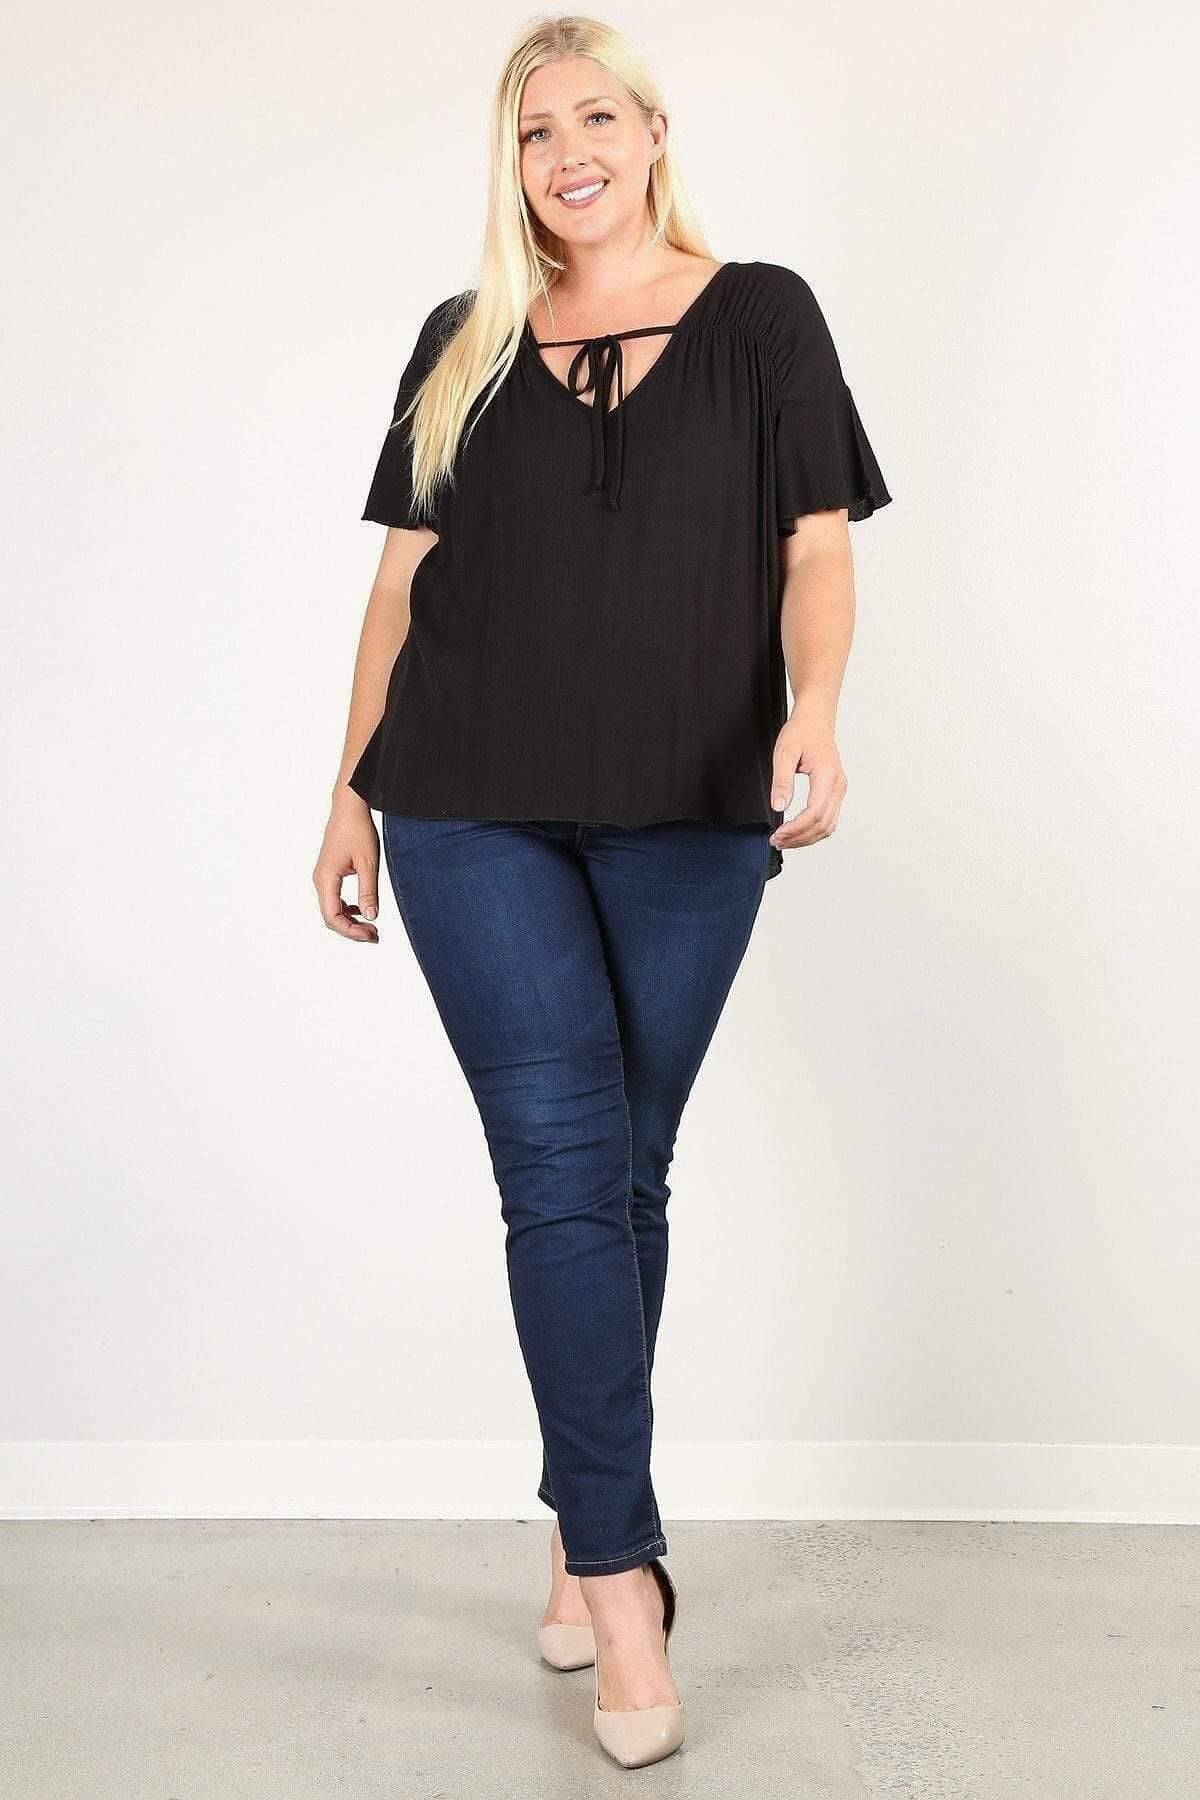 Black 3/4 Ruched Sleeve Plus Top - Shopping Therapy 1XL Top